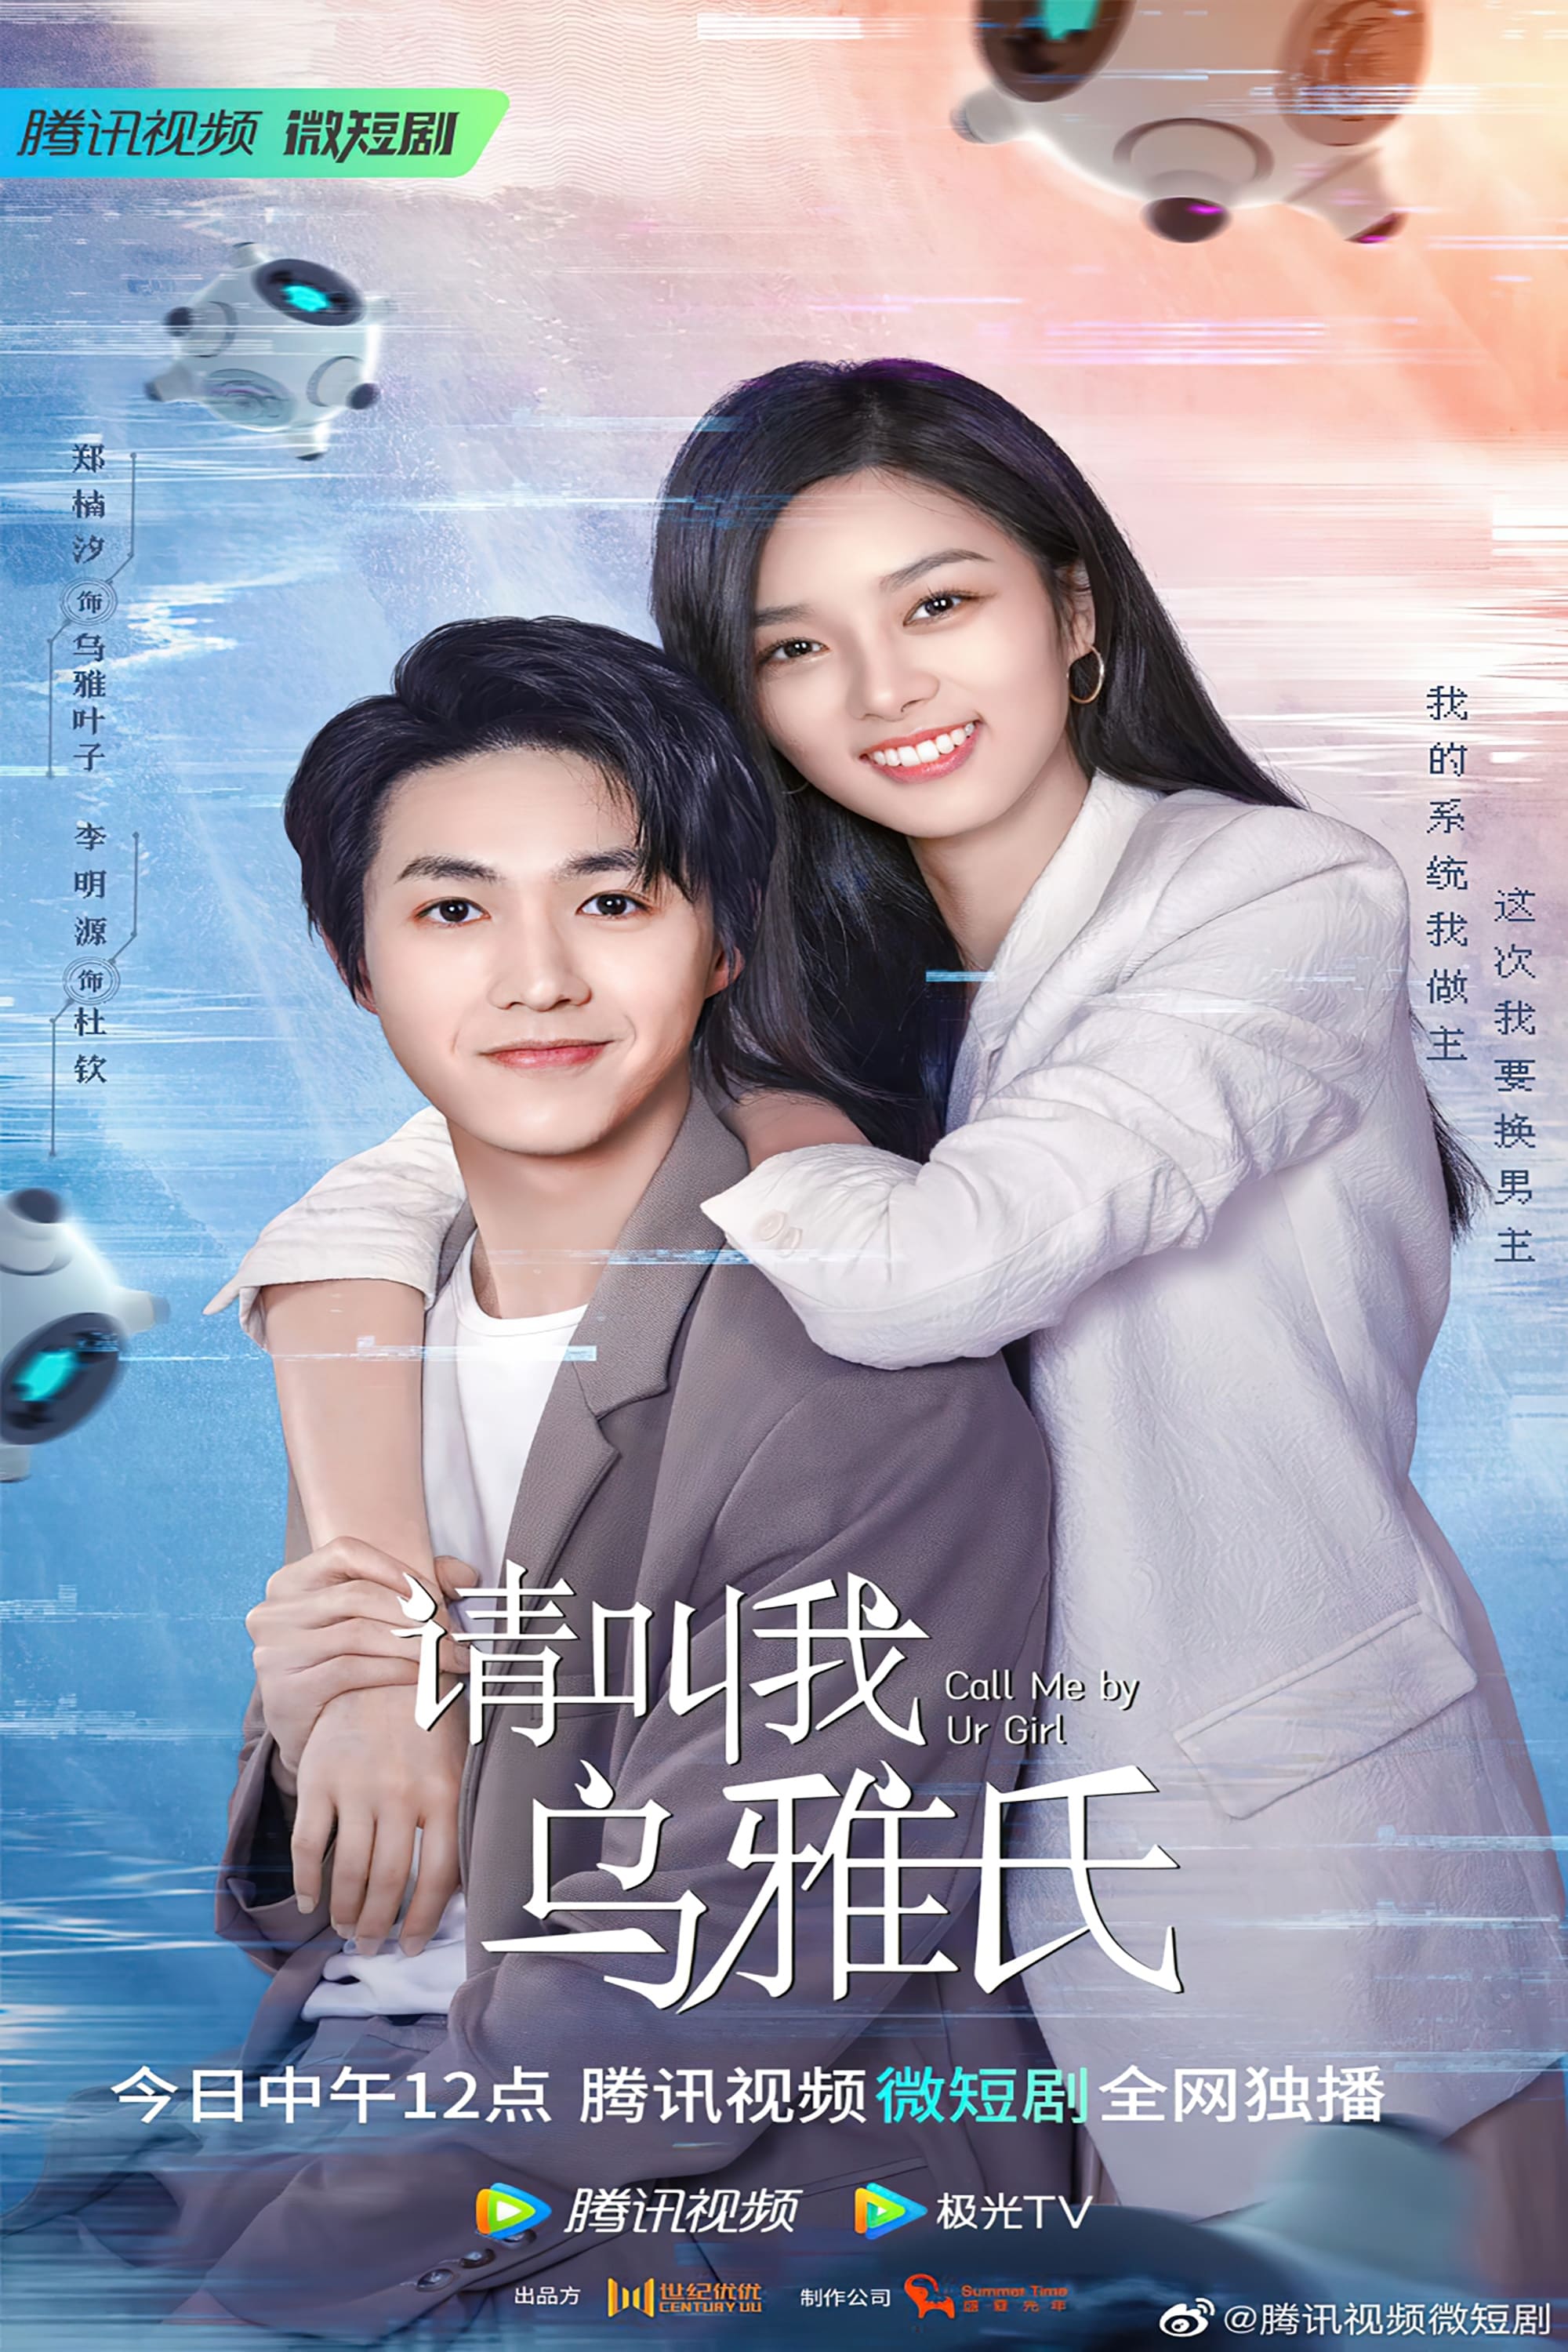 TV ratings for Call Me By Ur Girl (请叫我乌雅氏) in New Zealand. Tencent Video TV series